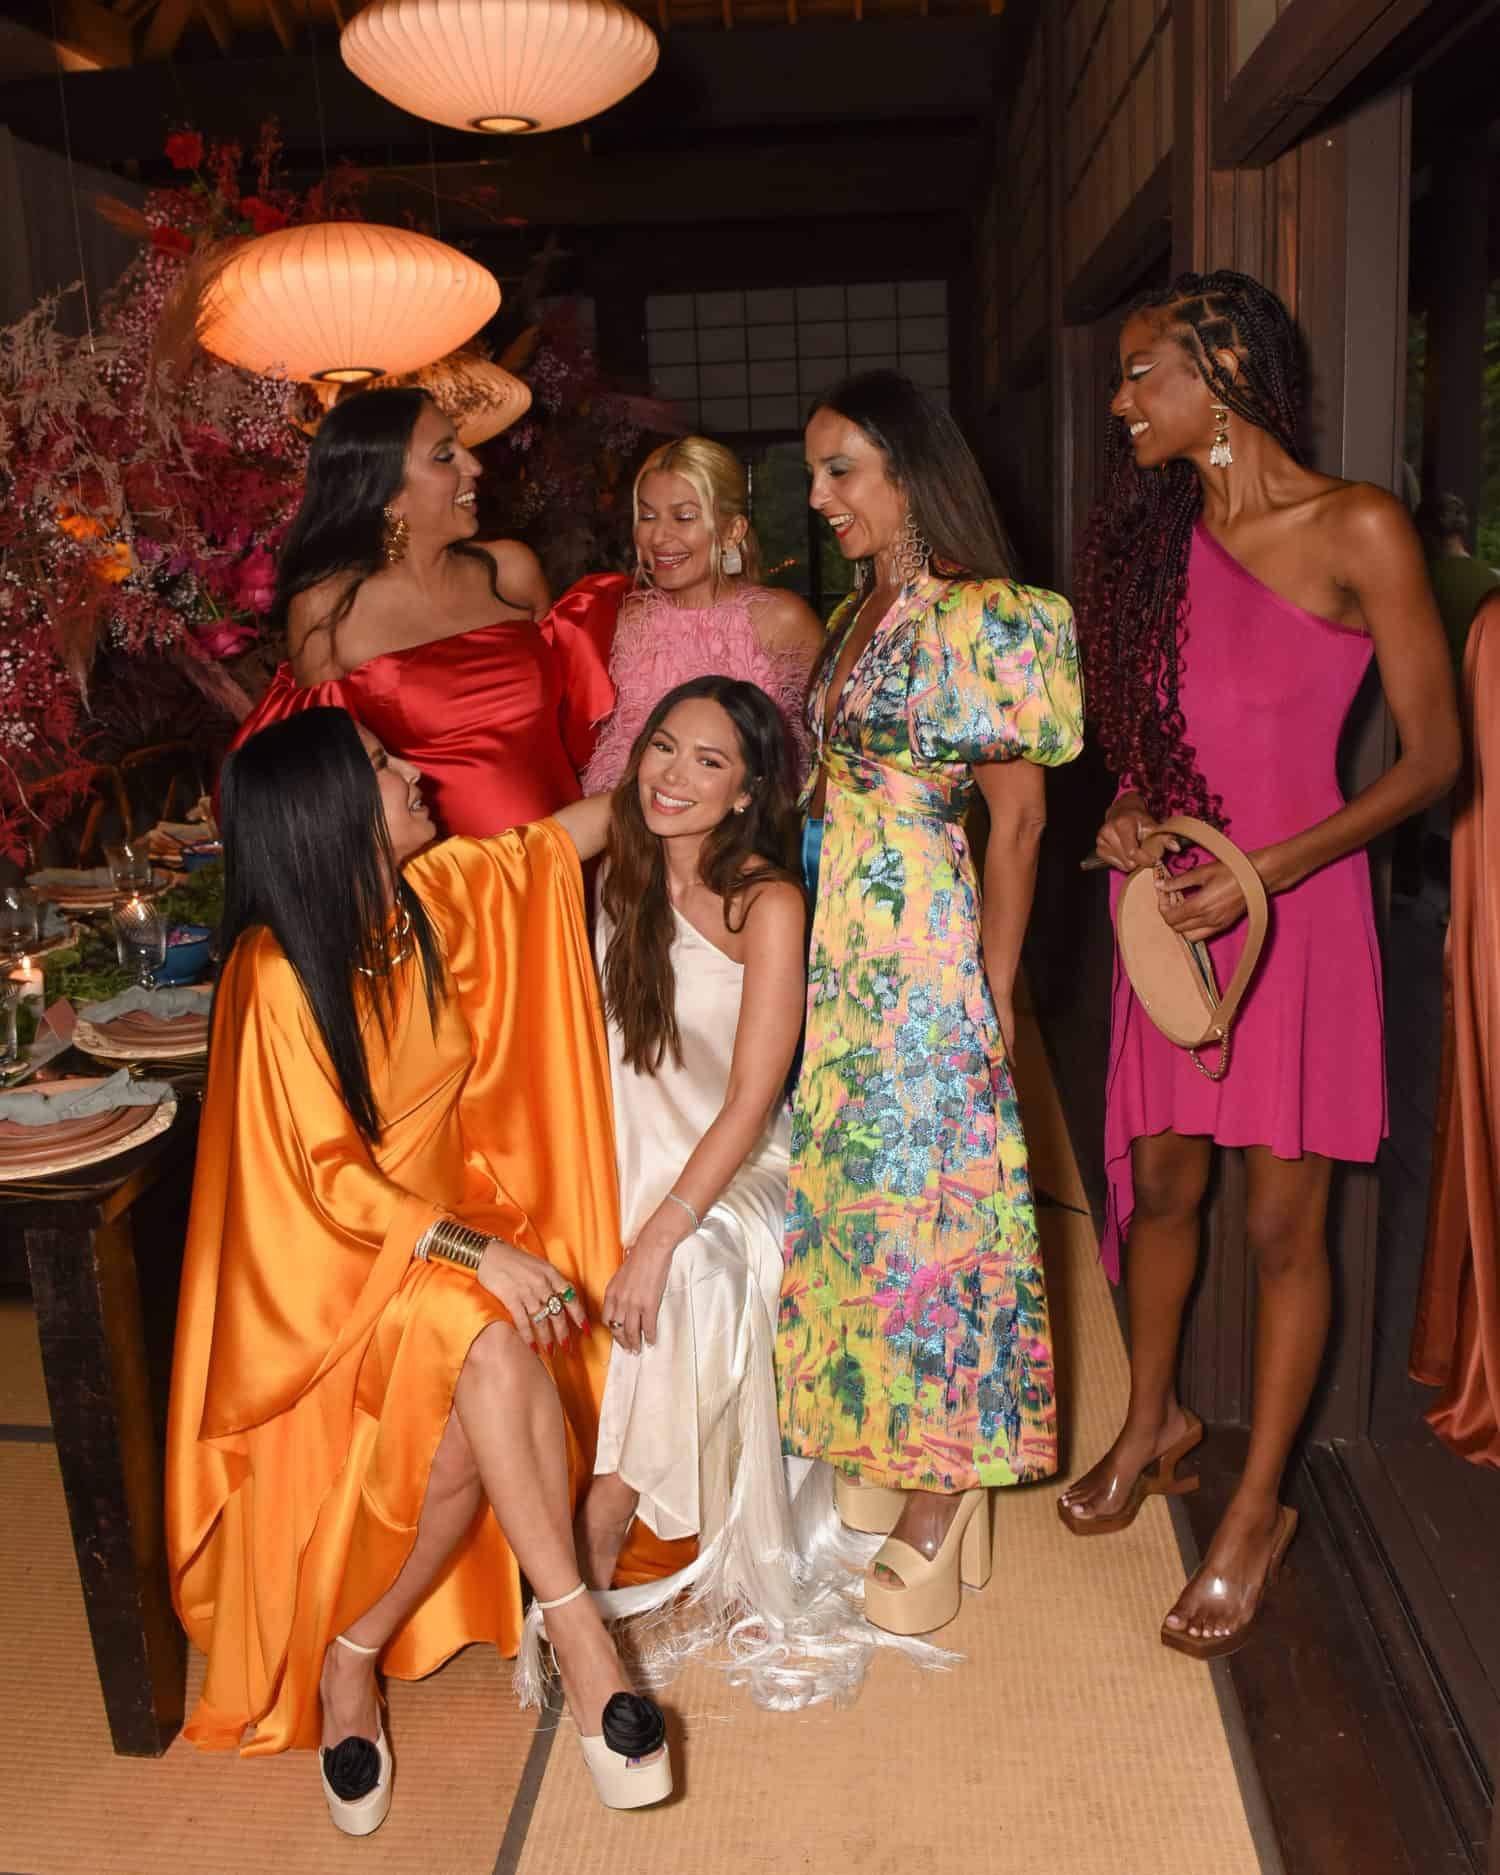 Daily Events Diary: amfAR Los Angeles, An Art Unveiling At The Seville,  Pritika Swarup's Diwali Celebration, Out To Dinner With Cult Gaia, Anine  Bing, Laura Ashley x Batsheva, And More! - Daily